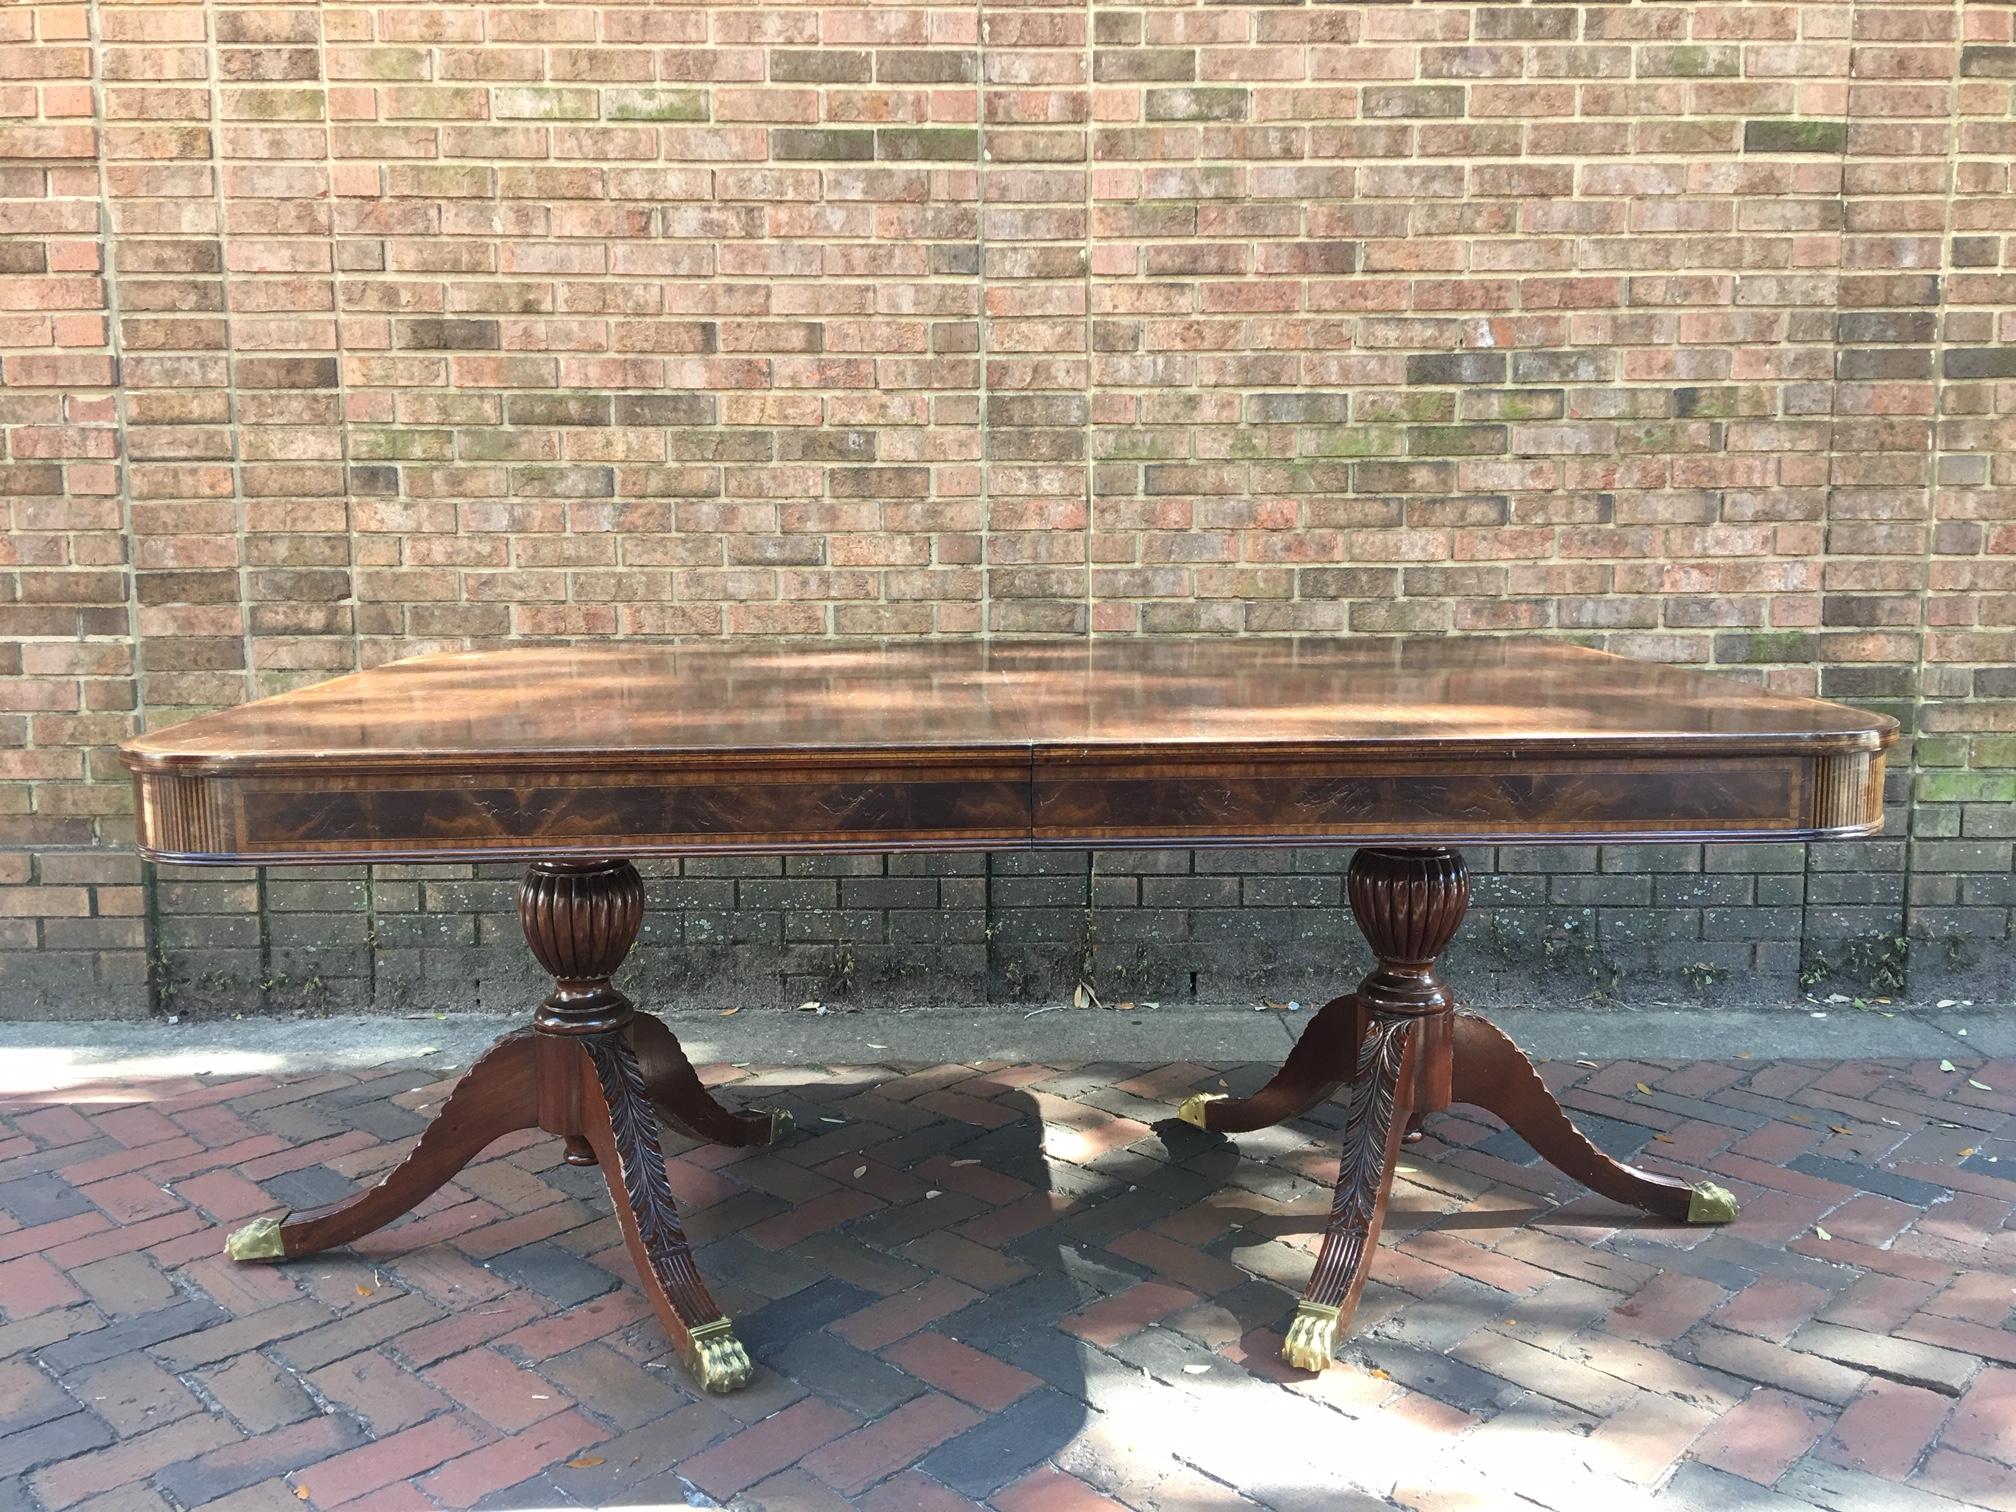 Georgian Banquet English Mahogany Dining Room Table with Pedestals & Leaves, 20th Century